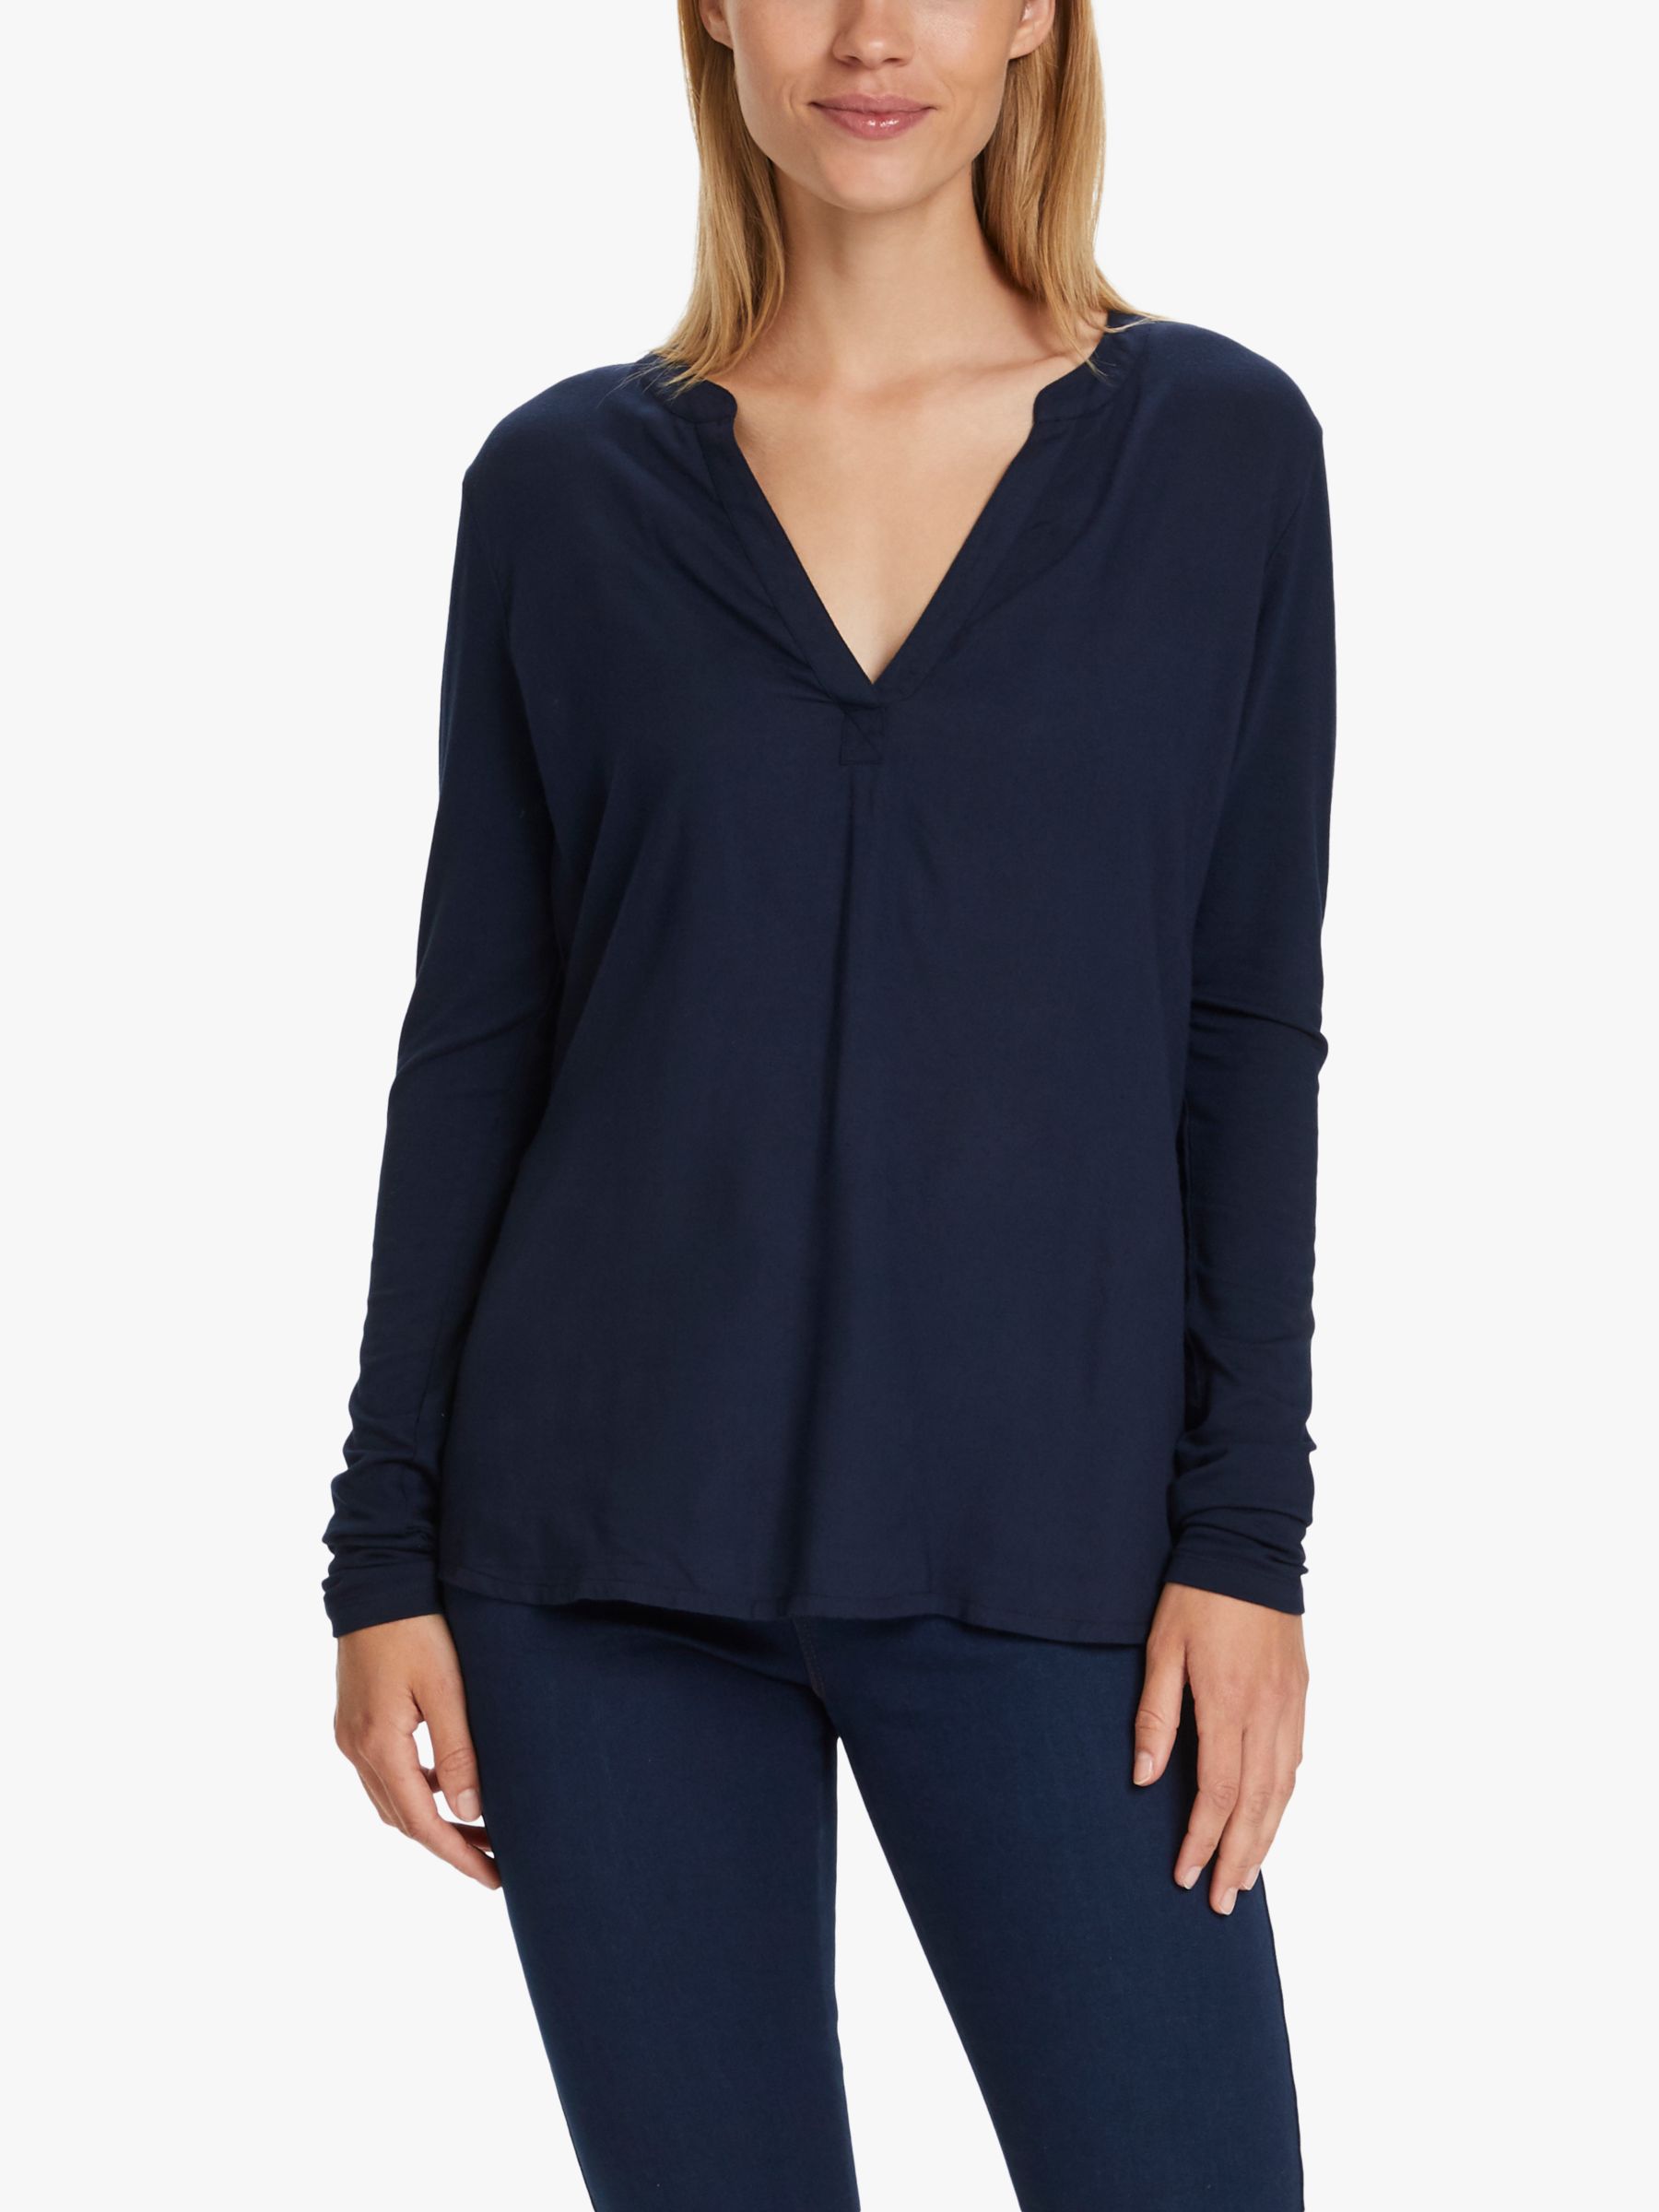 Women's Relaxed Fit V-Neck in Midnight